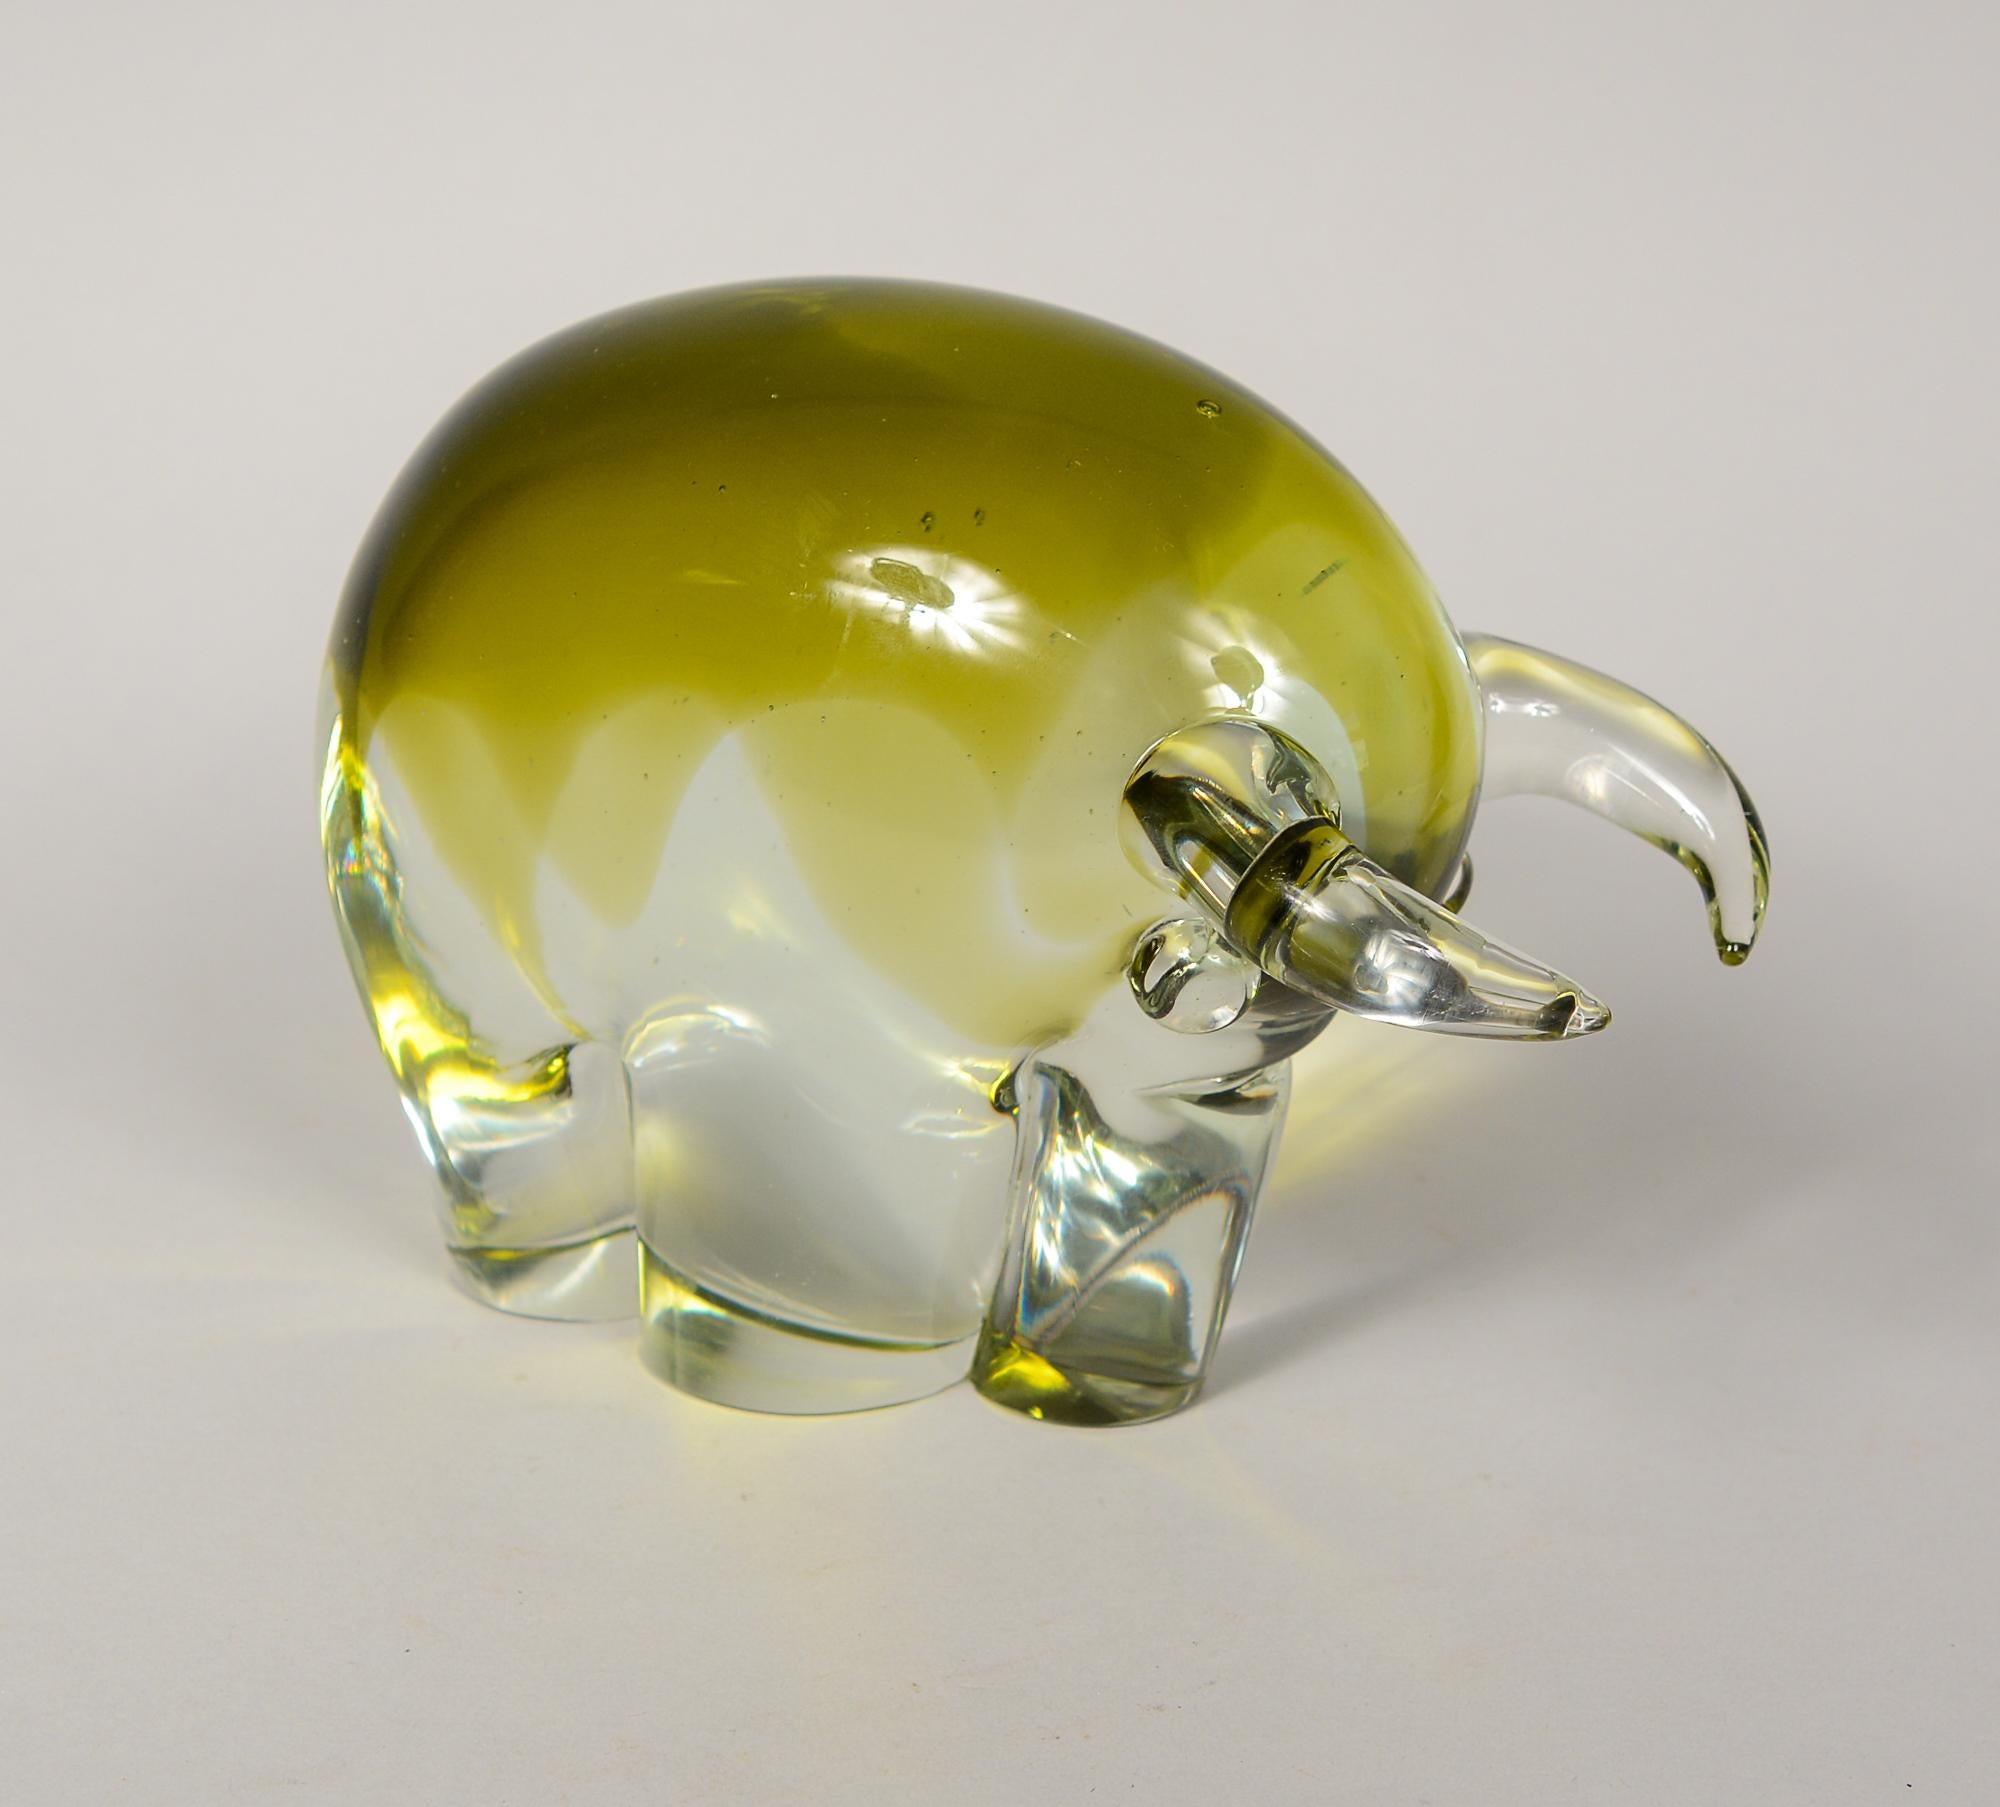 Heavy modernist glass bull by Luciano Gaspari for Salviati. The bull is clear glass with a sommerso layer of yellow in the top portion. There are couple tiny chips on the bottom edge of the base. One horn has a few light scratches.